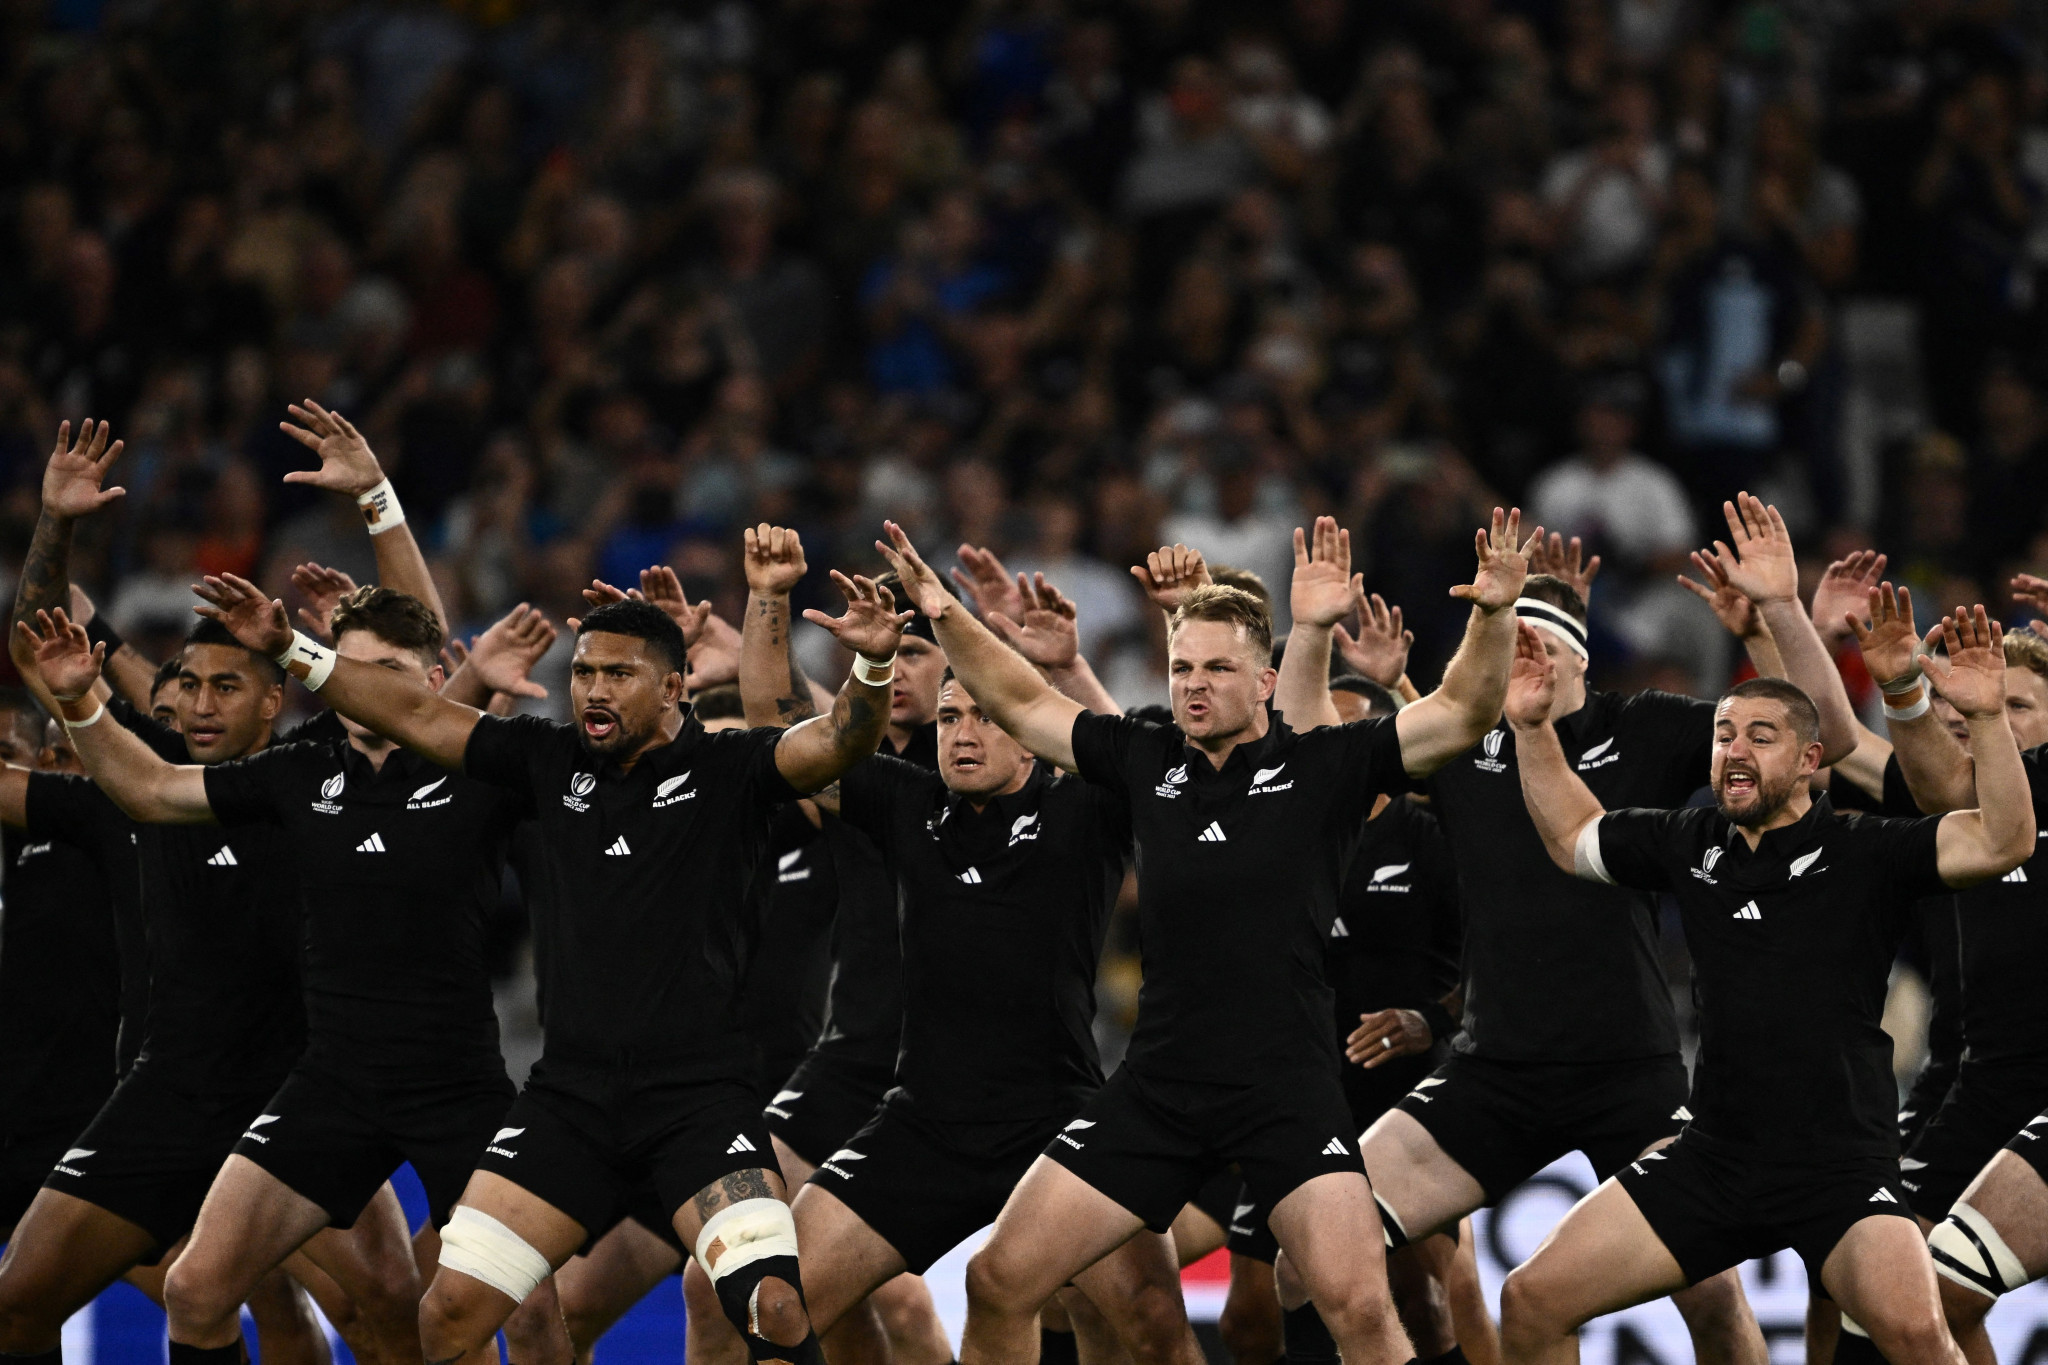 The victory against Italy moved New Zealand to the brink of the Rugby World Cup quarter-finals ©Getty Images